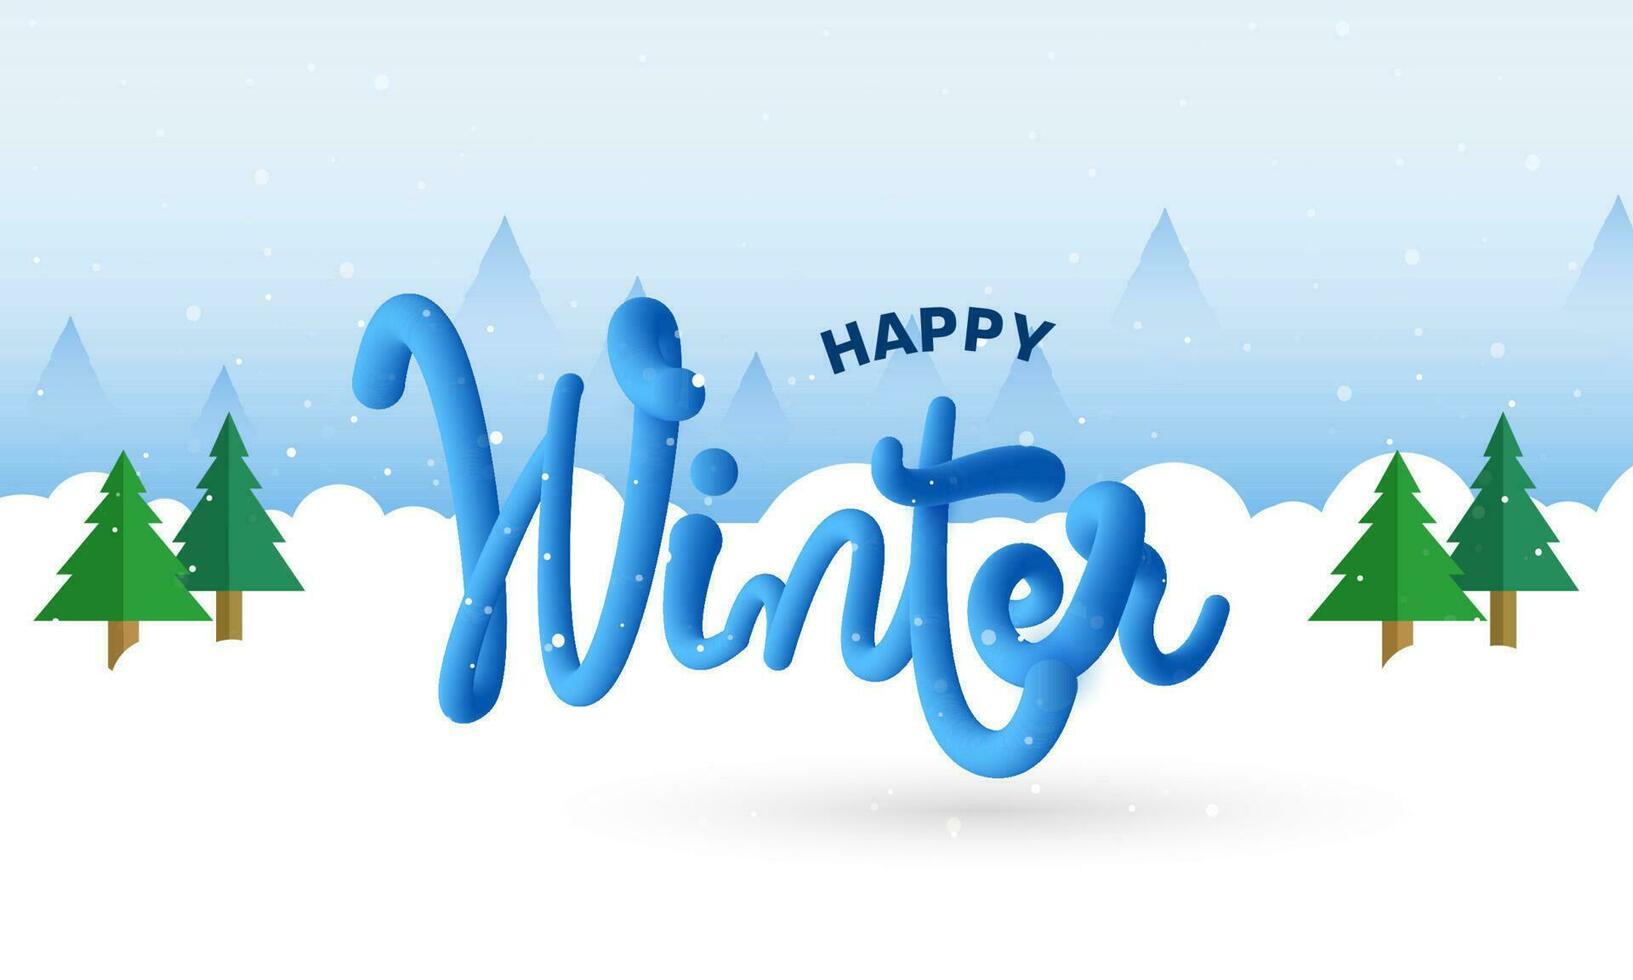 Stylish Happy Winter Font With Xmas Tree On Snow Falling Blue And White Background. vector